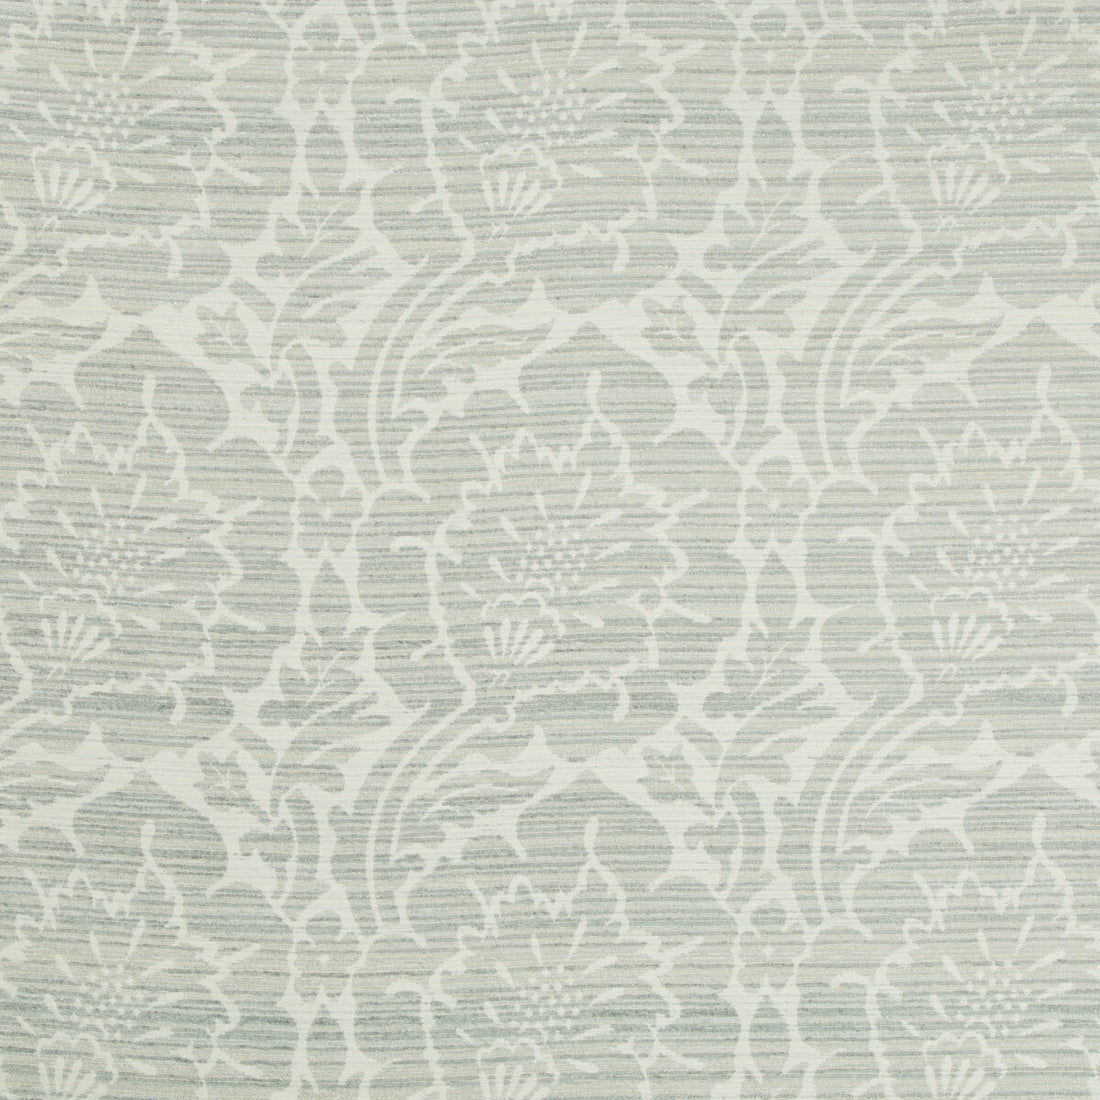 Kravet Contract fabric in 35009-11 color - pattern 35009.11.0 - by Kravet Contract in the Crypton Incase collection